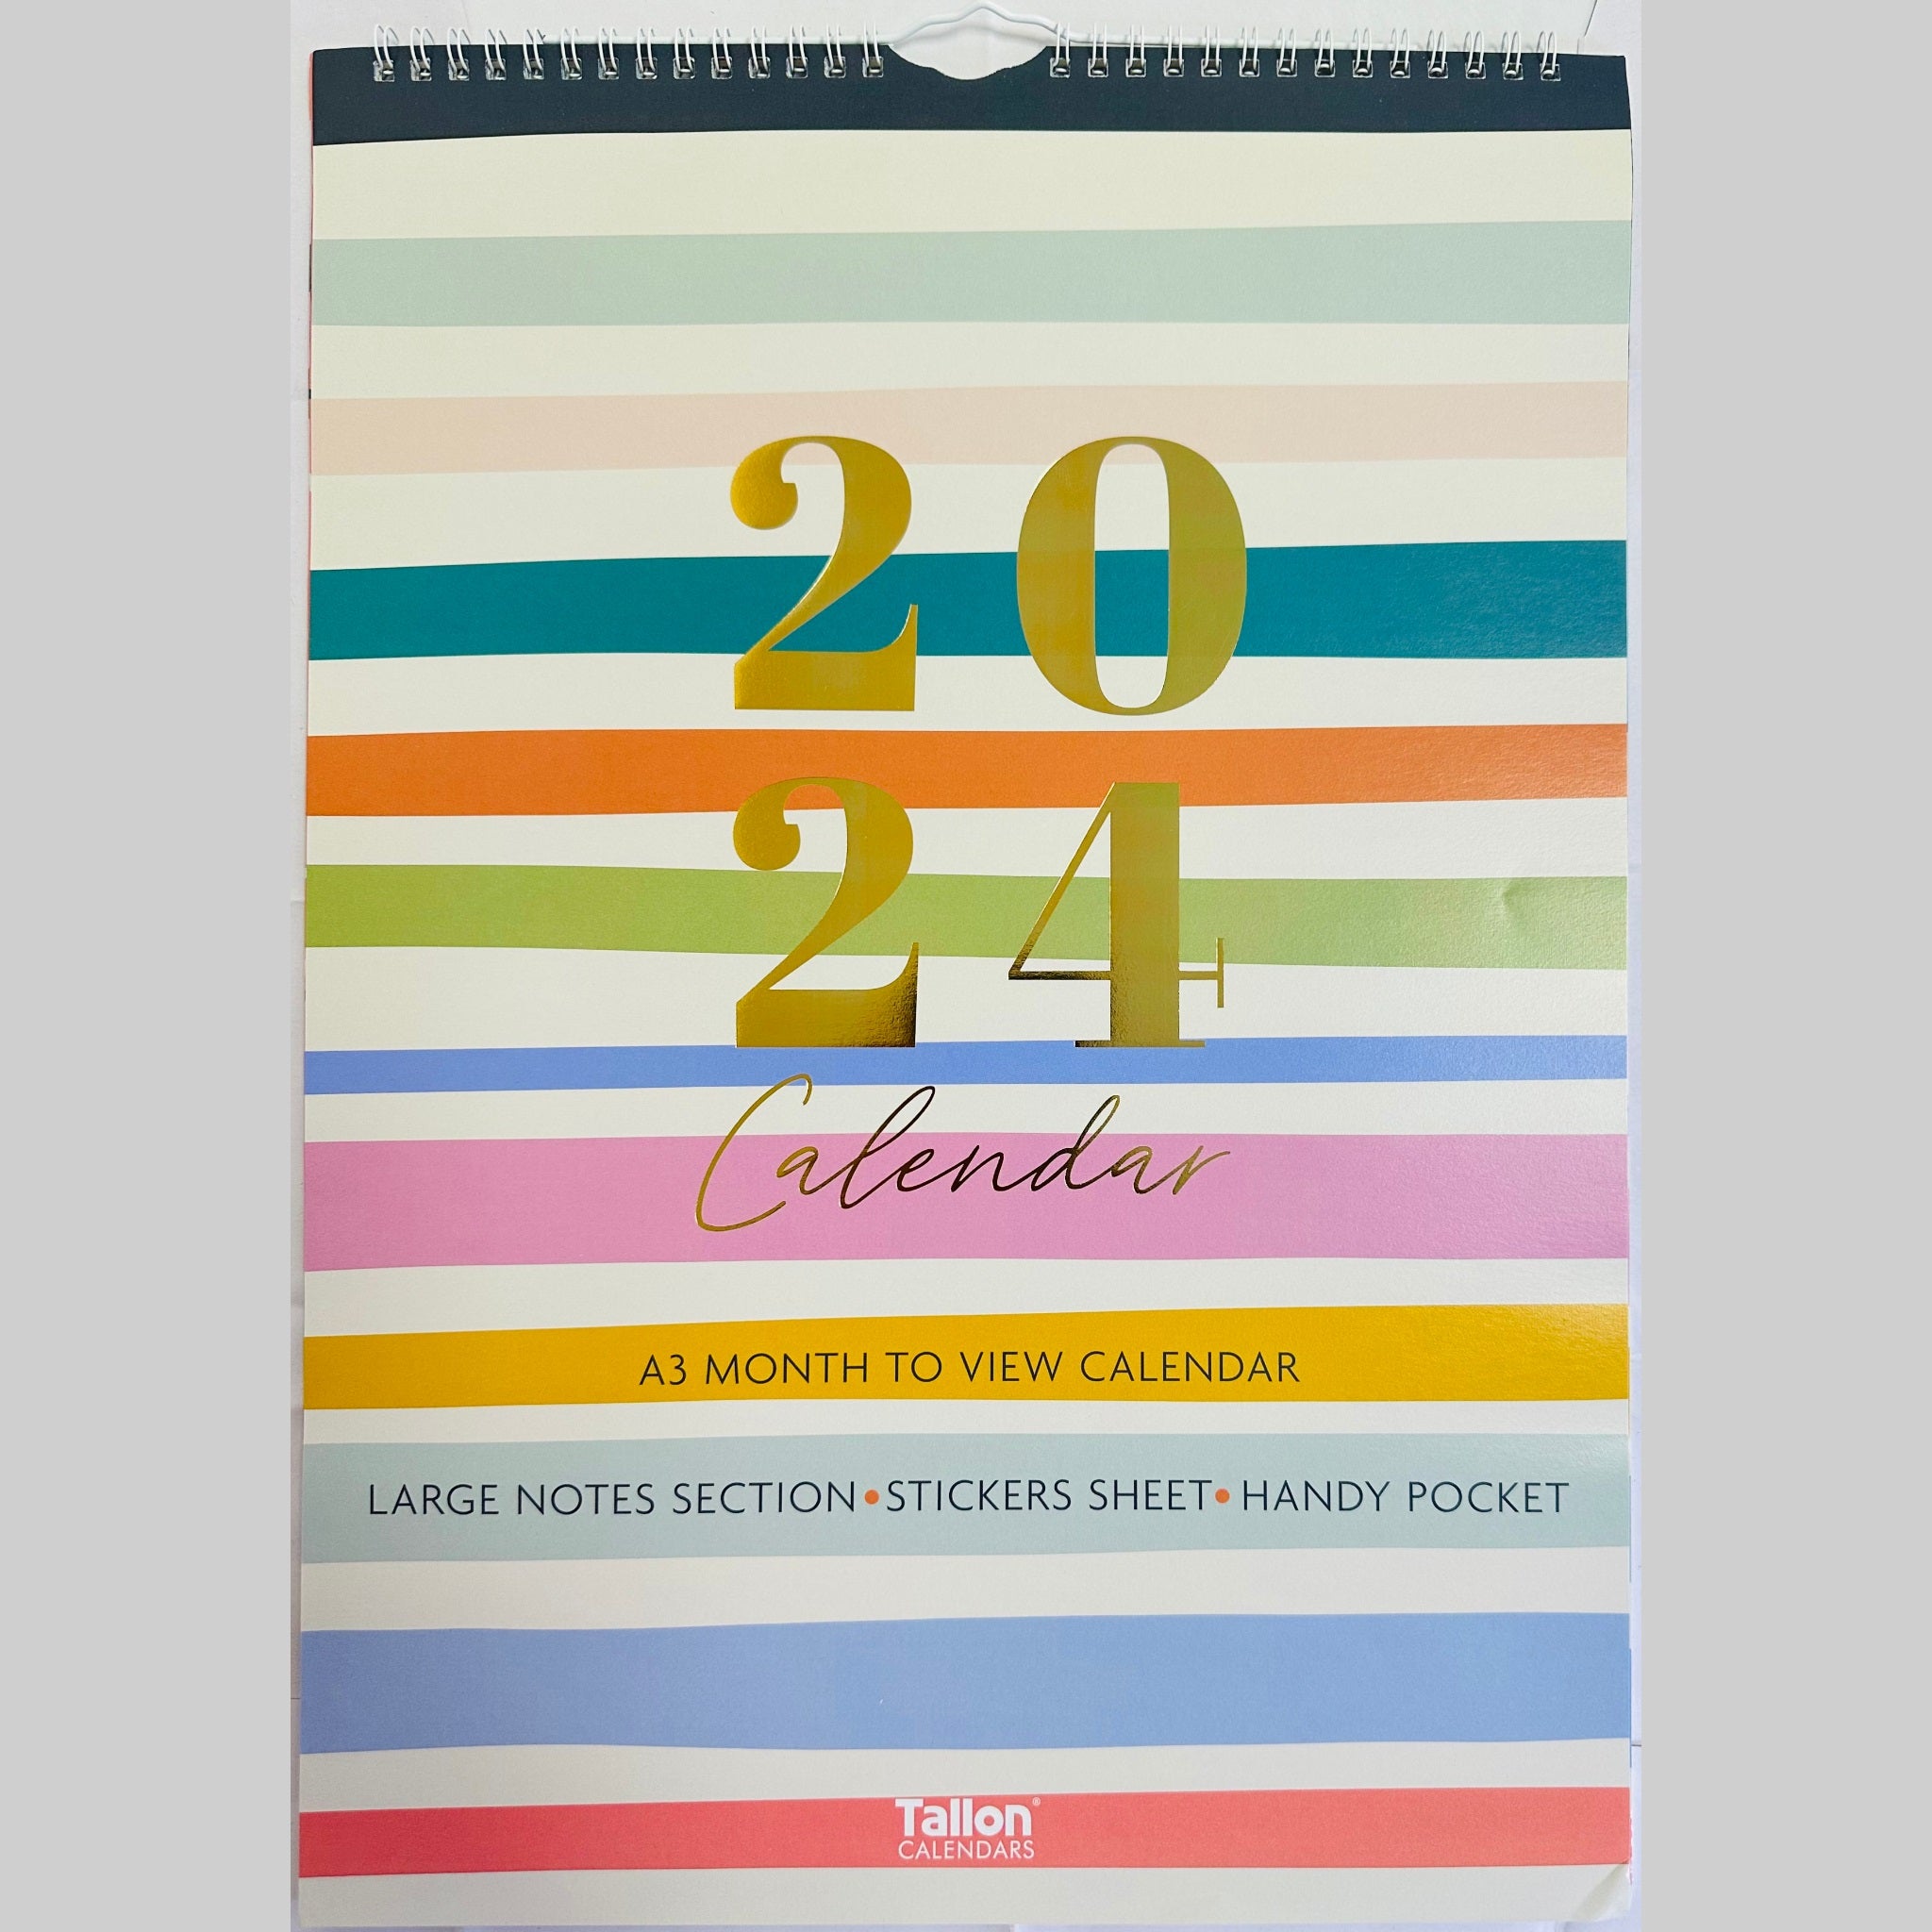 Beclen Harp 2024 MTV/ A3 Large Notes Section Family Home Organiser Planner Calendar Month To View Stickers Sheet & Handy Pocket/ Long Wall Planner Stripes, Flowers